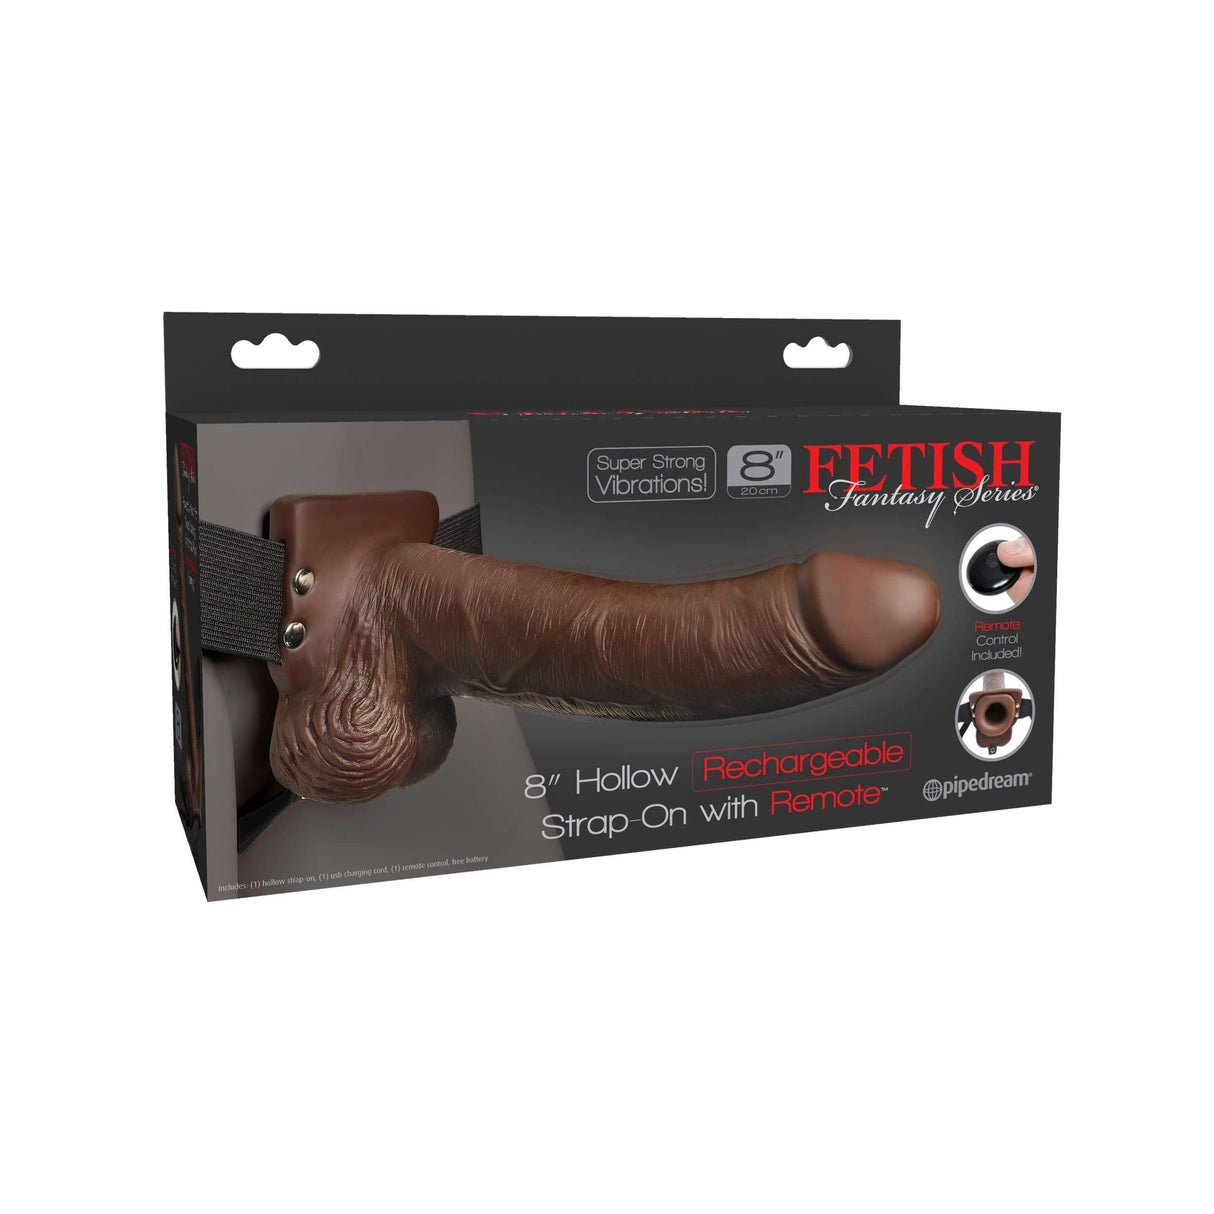 Pipedream - Fetish Fantasy Hollow Rechargeable Strap-On Remote 8" (Brown) PD1790 CherryAffairs